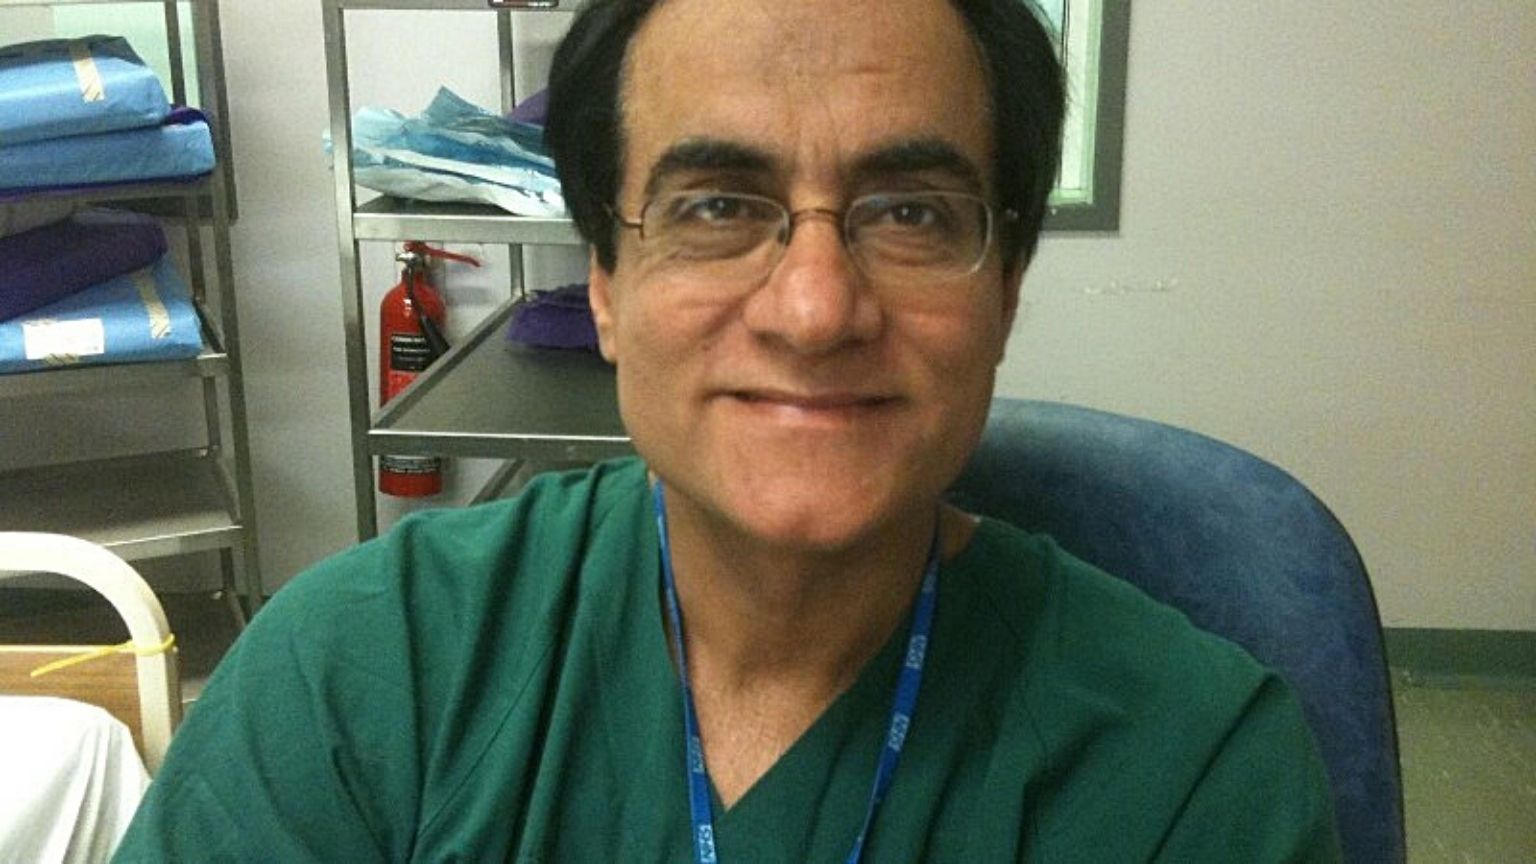 UK surgeon remains suspended a year after saying governments are using Covid to control people